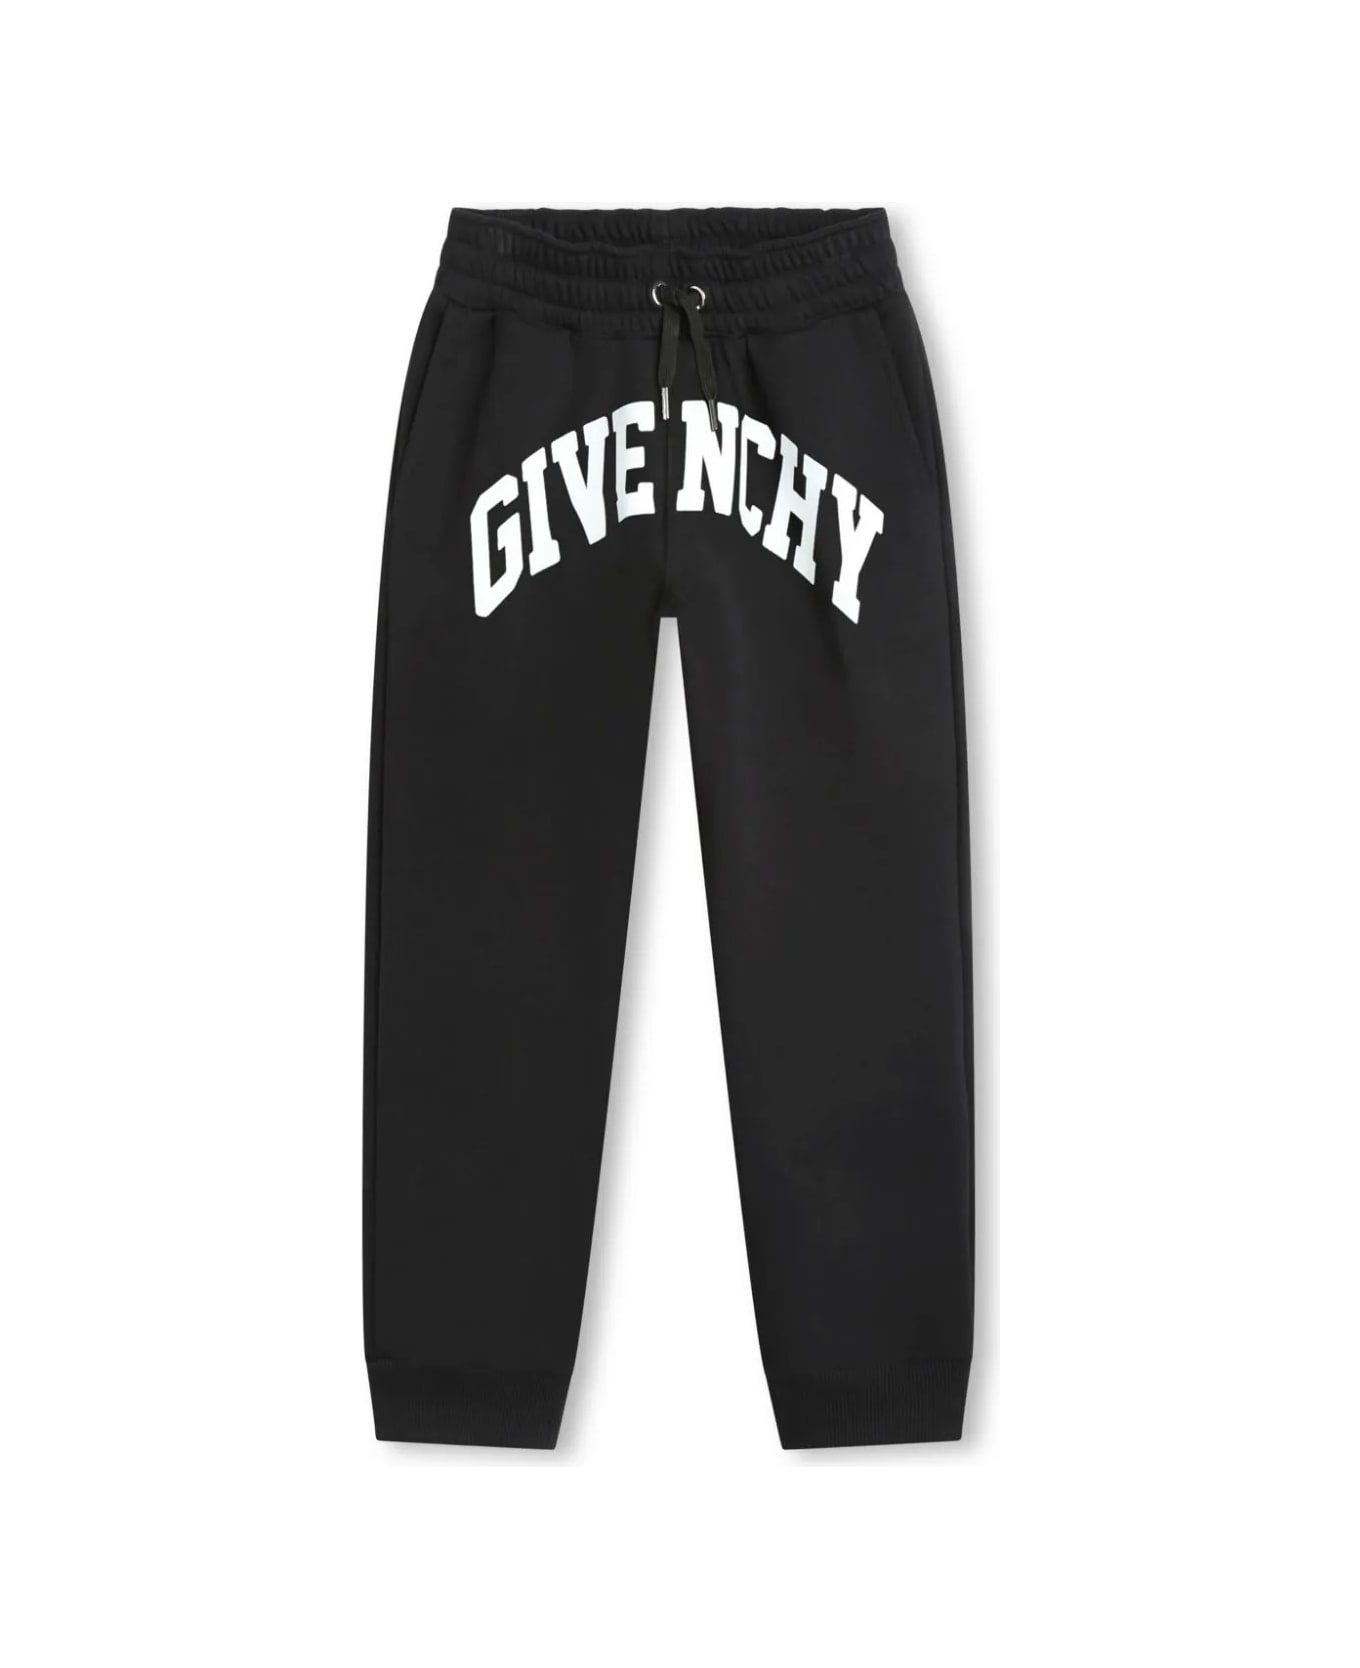 Givenchy Black Joggers With Arched Logo - Black ボトムス